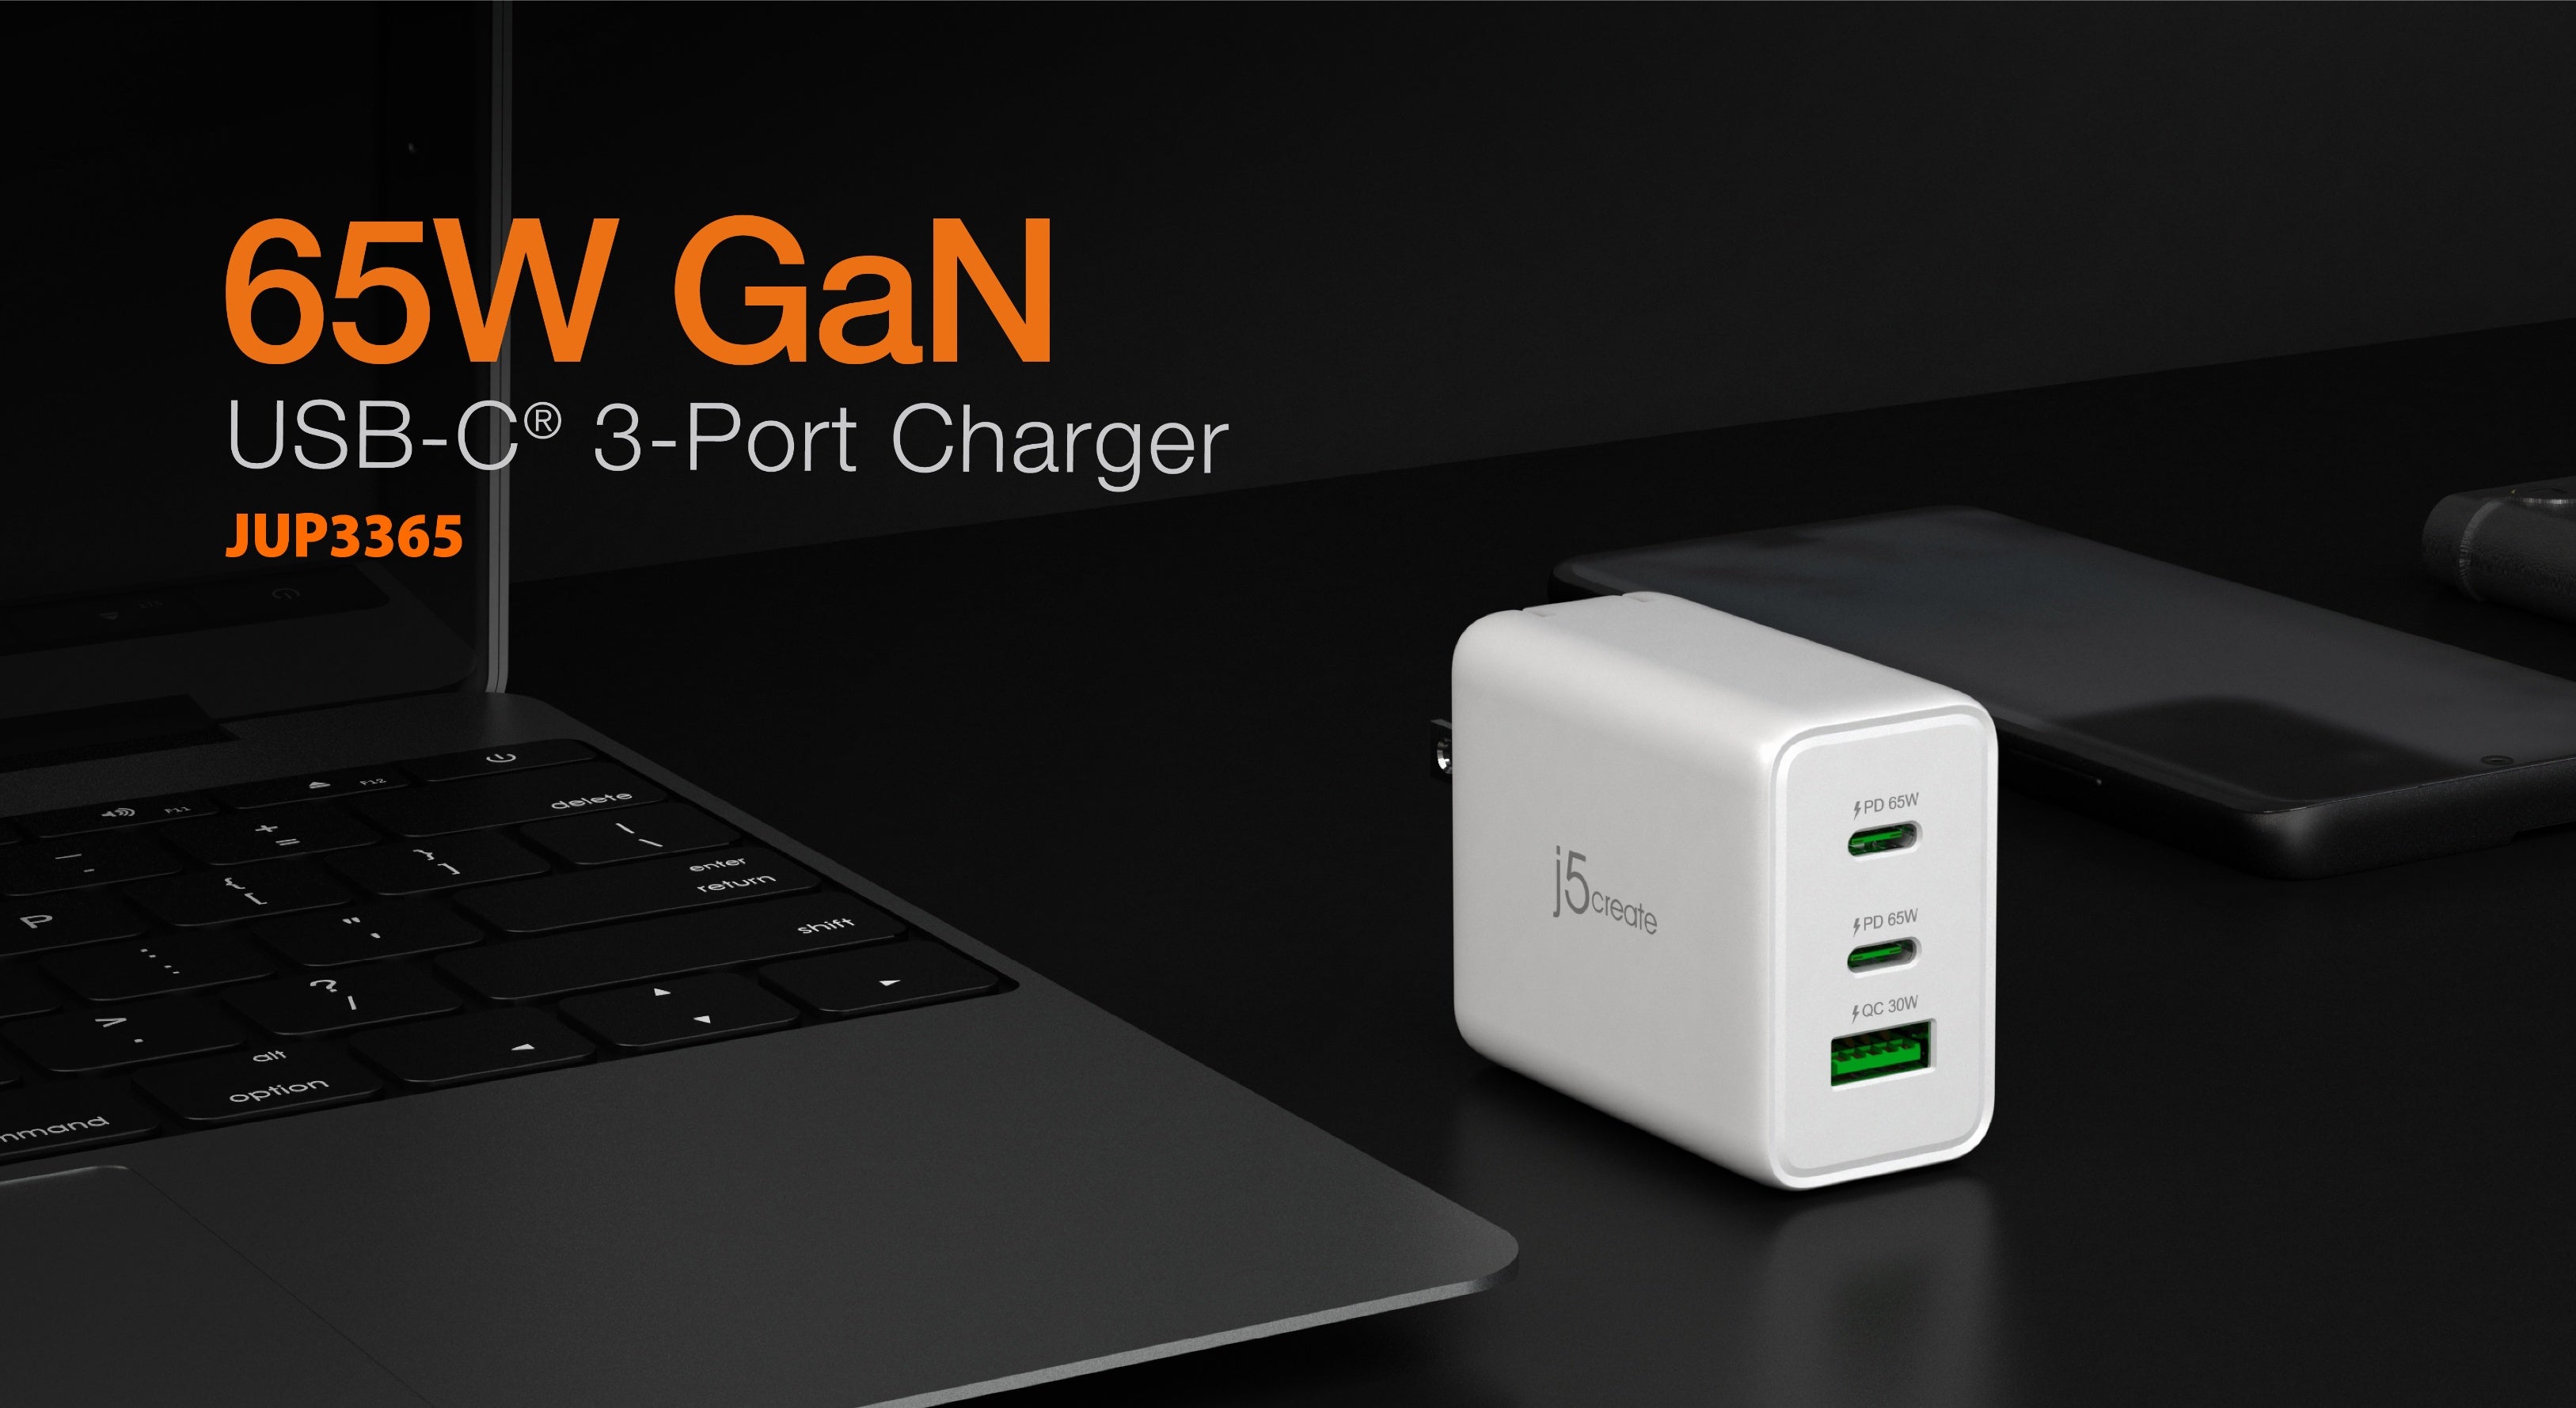 Chargeur Rapide Multi Usb 3 Ports (5V 3A Max),67W Chargeur Usb C